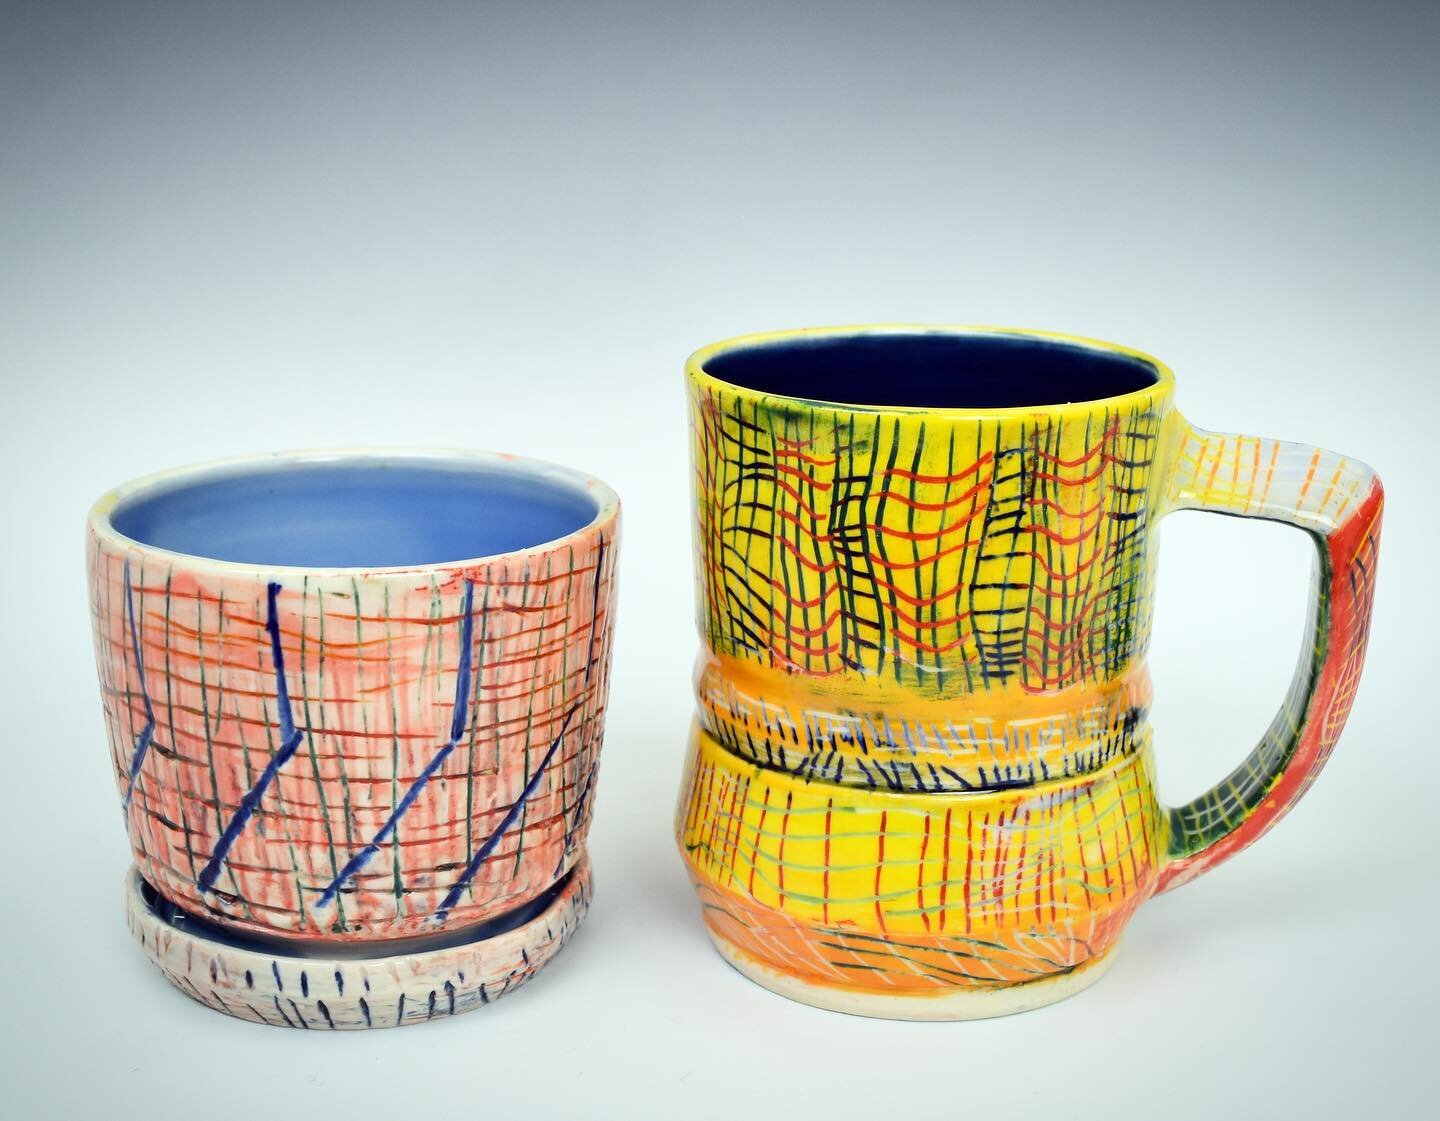 I&rsquo;ve been pushing myself and having way too much fun with the surfaces of my mugs. This &ldquo;Yellow Time and Space Mug&rdquo; is available on my website!⭐️💥🌵 #ceramics #pottery #coffee #buyhandmade #contemporaryart #modernceramics #mug #suc